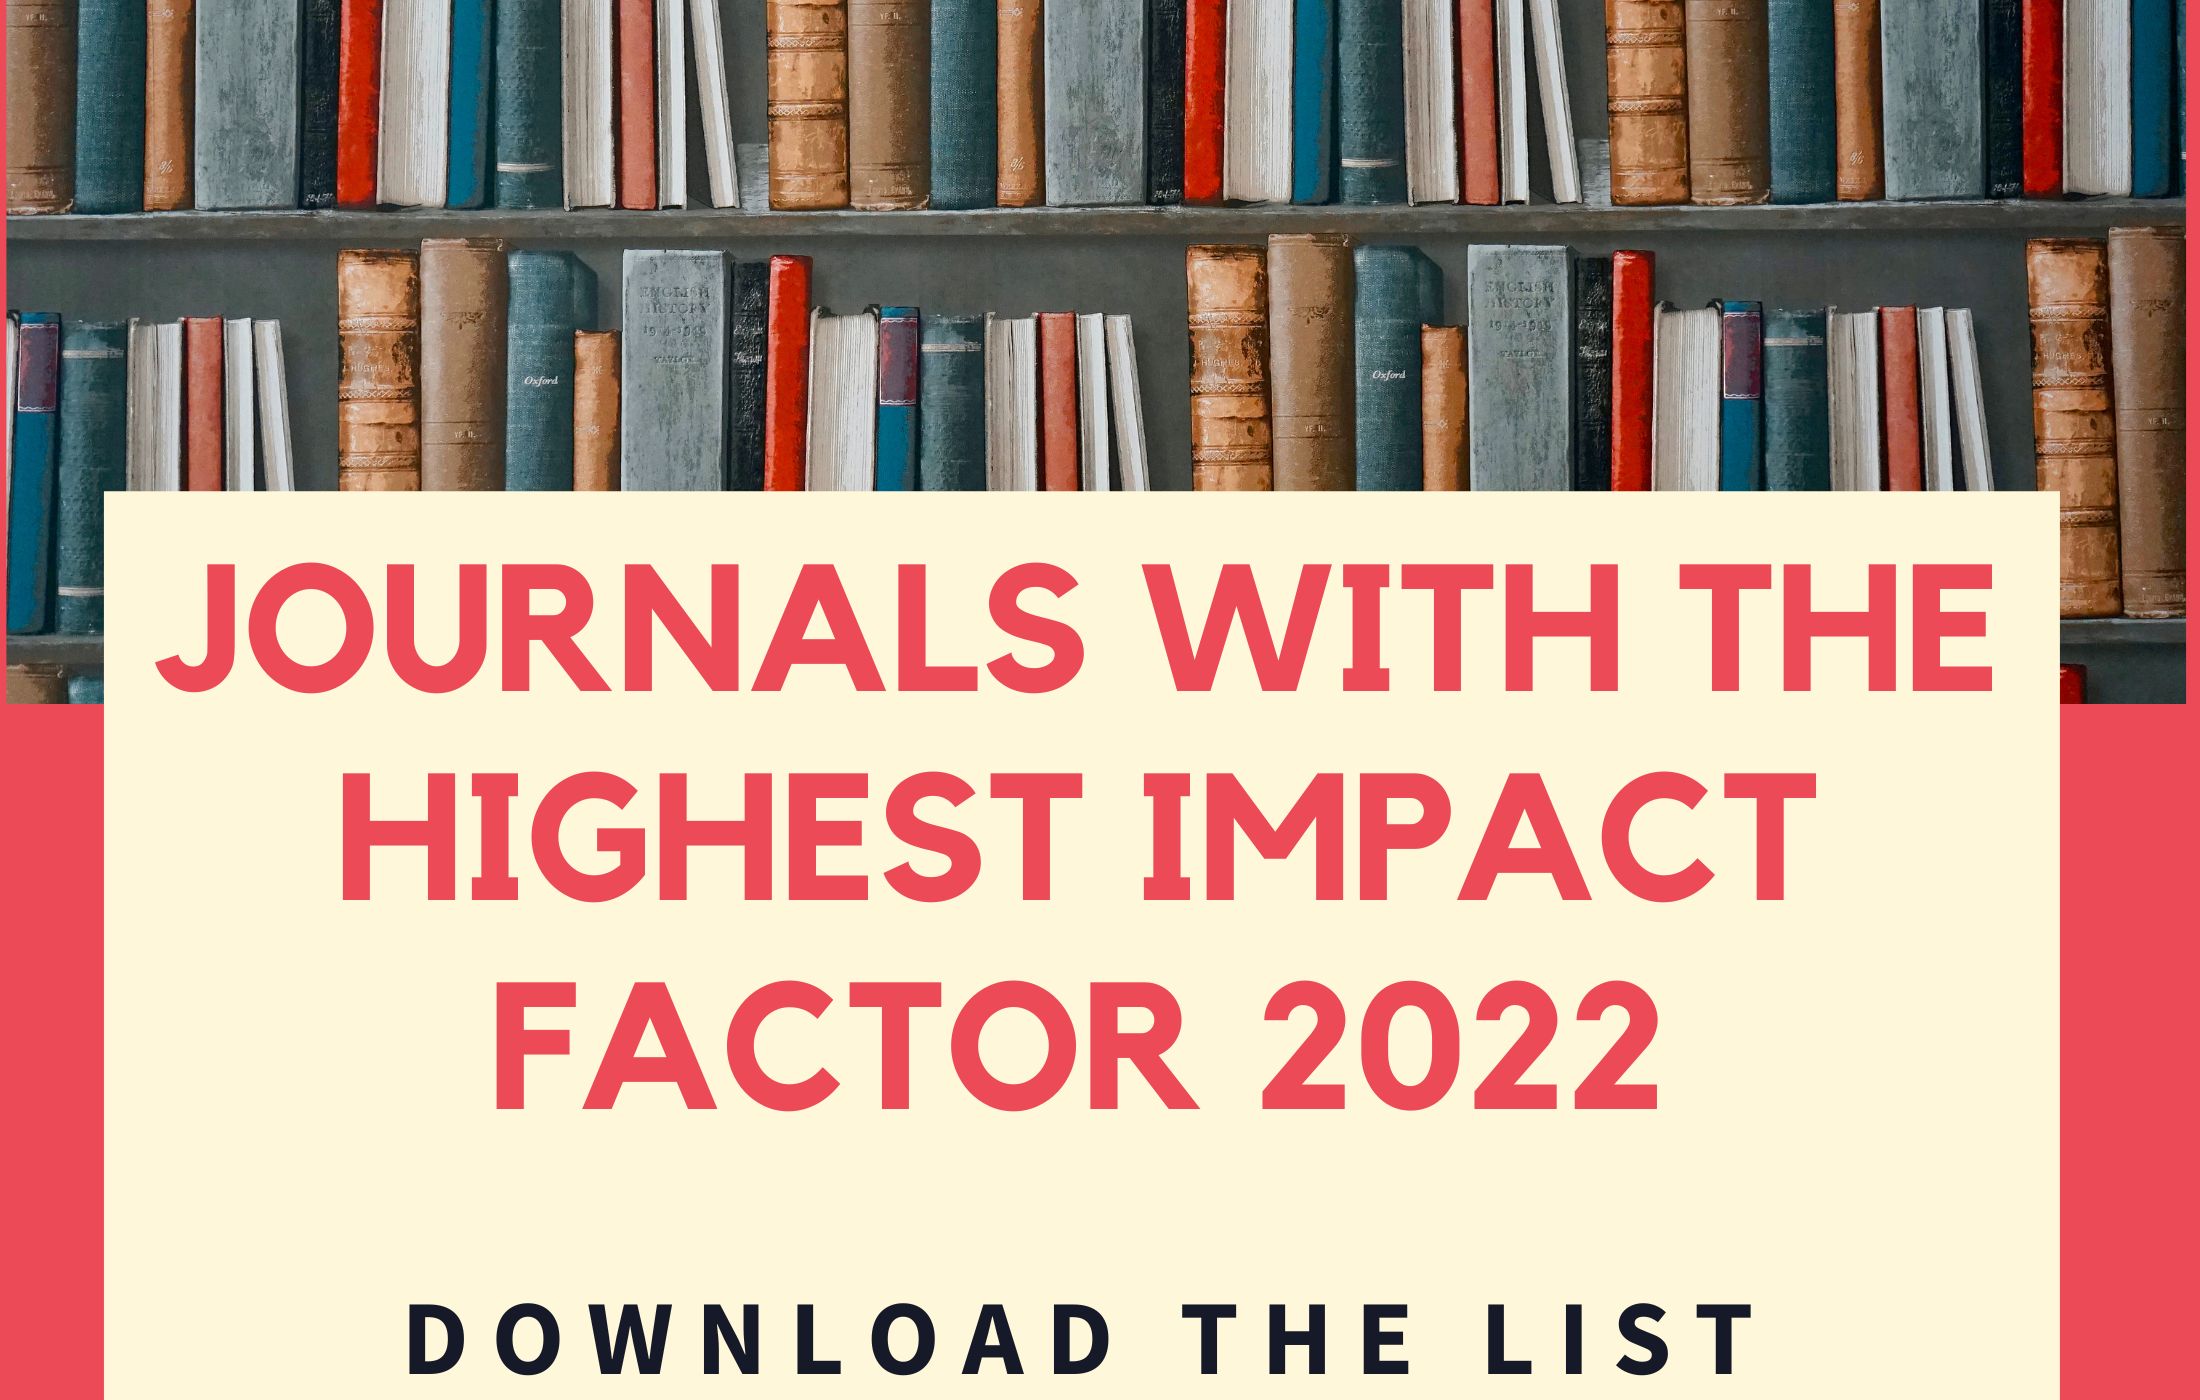 current research in food science impact factor 2022